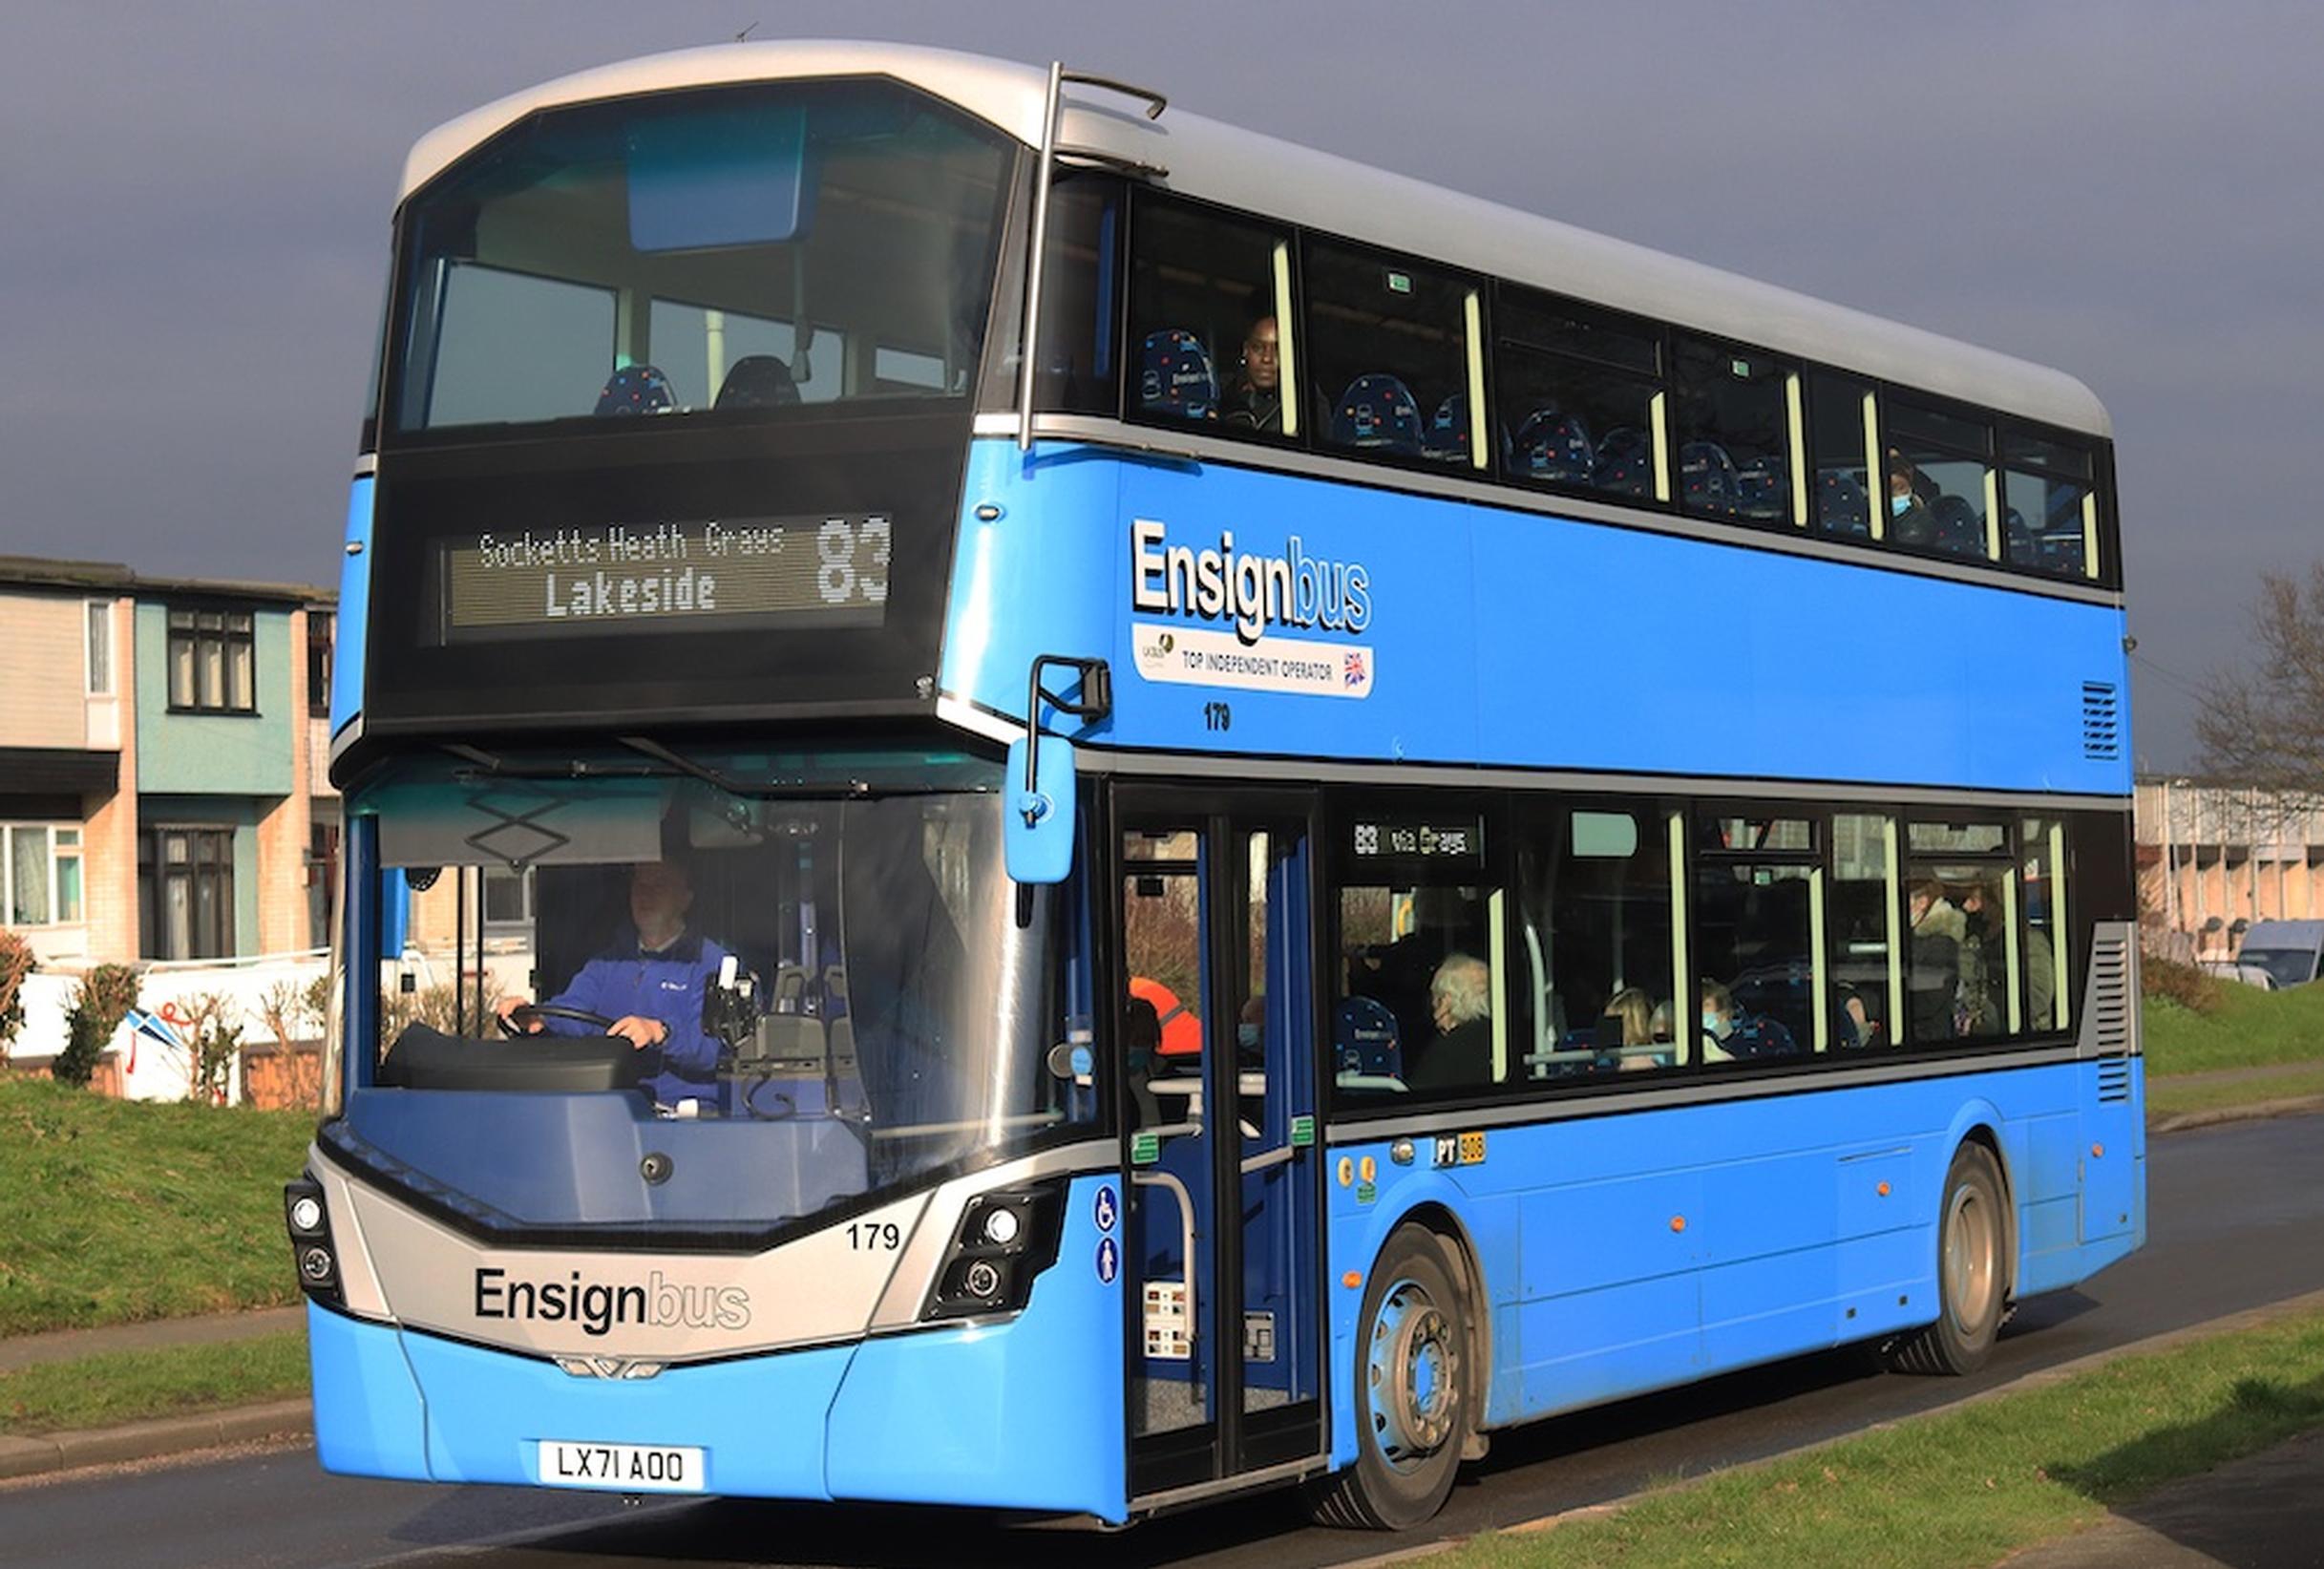 Contactless payments on Ensignbus services are now limited to £10